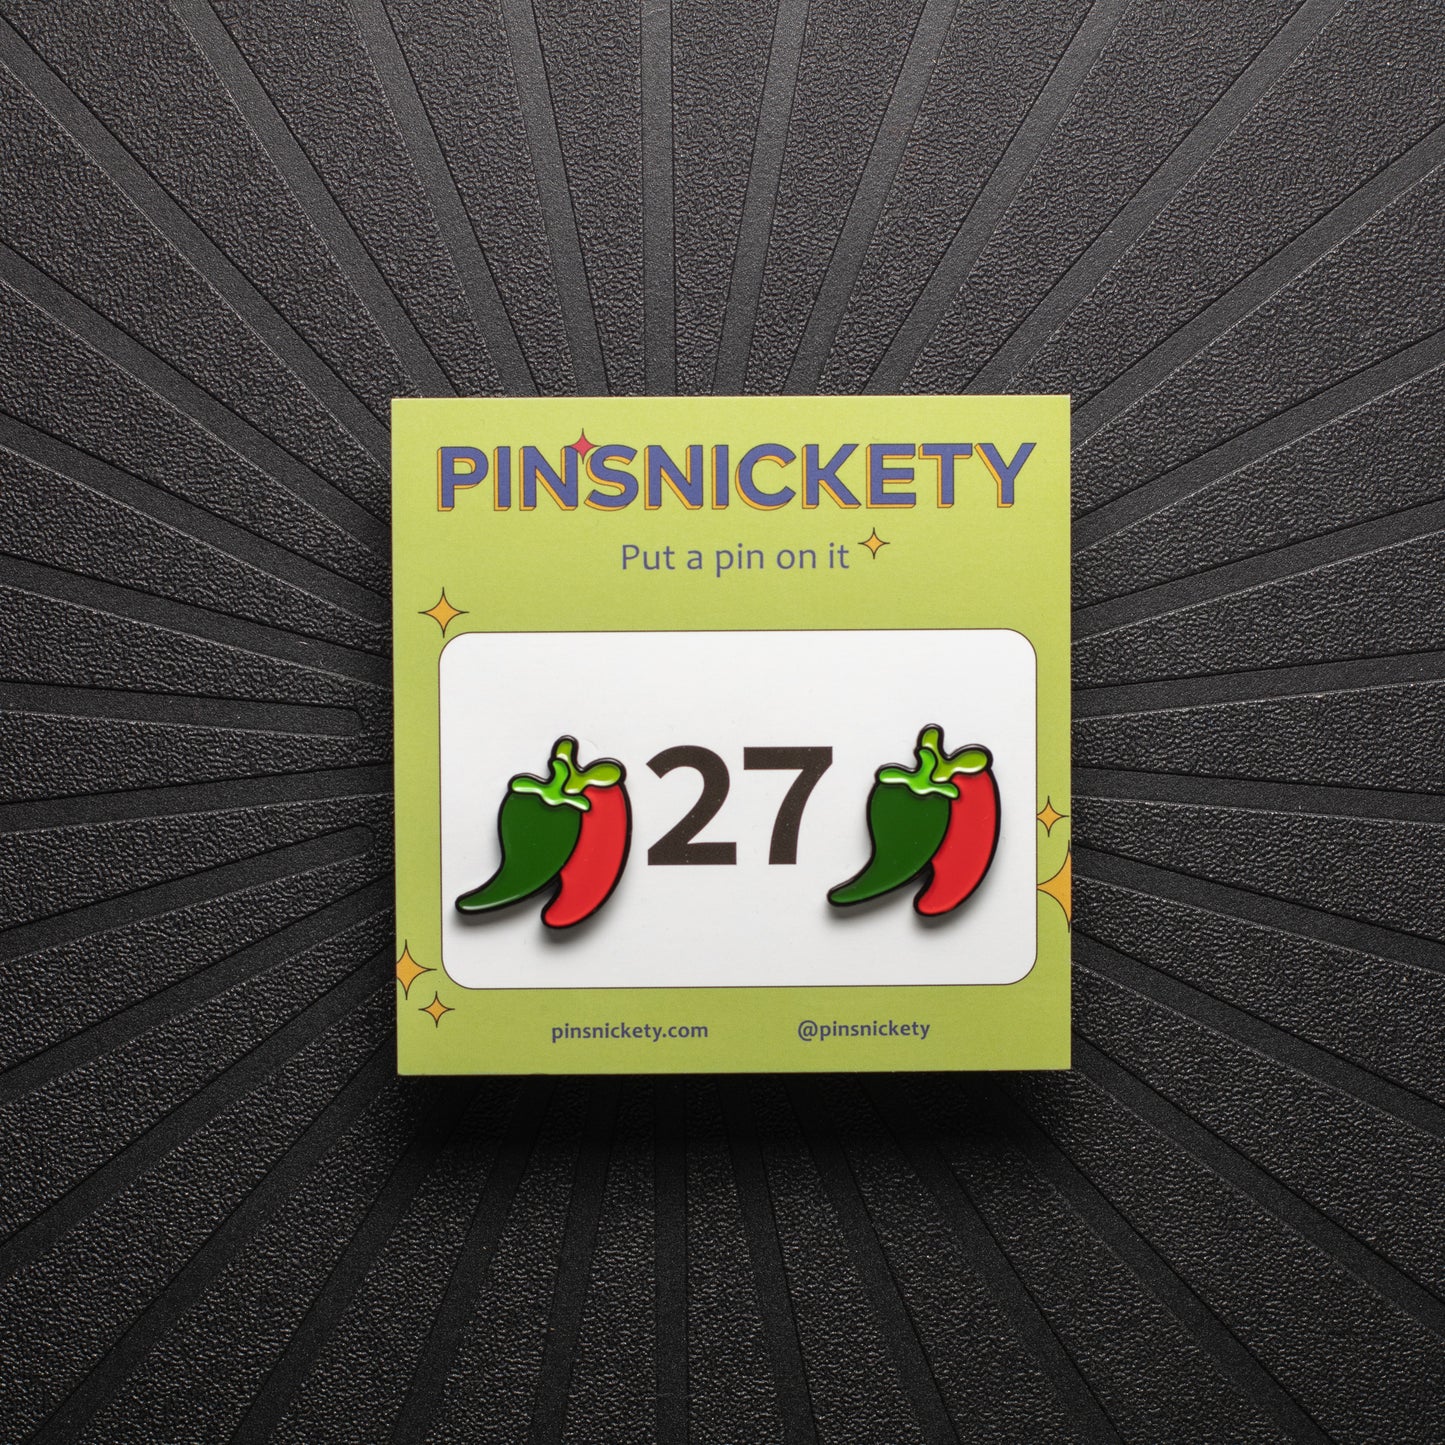 pinsnickety chili peppers horse show number pins on their product packaging card